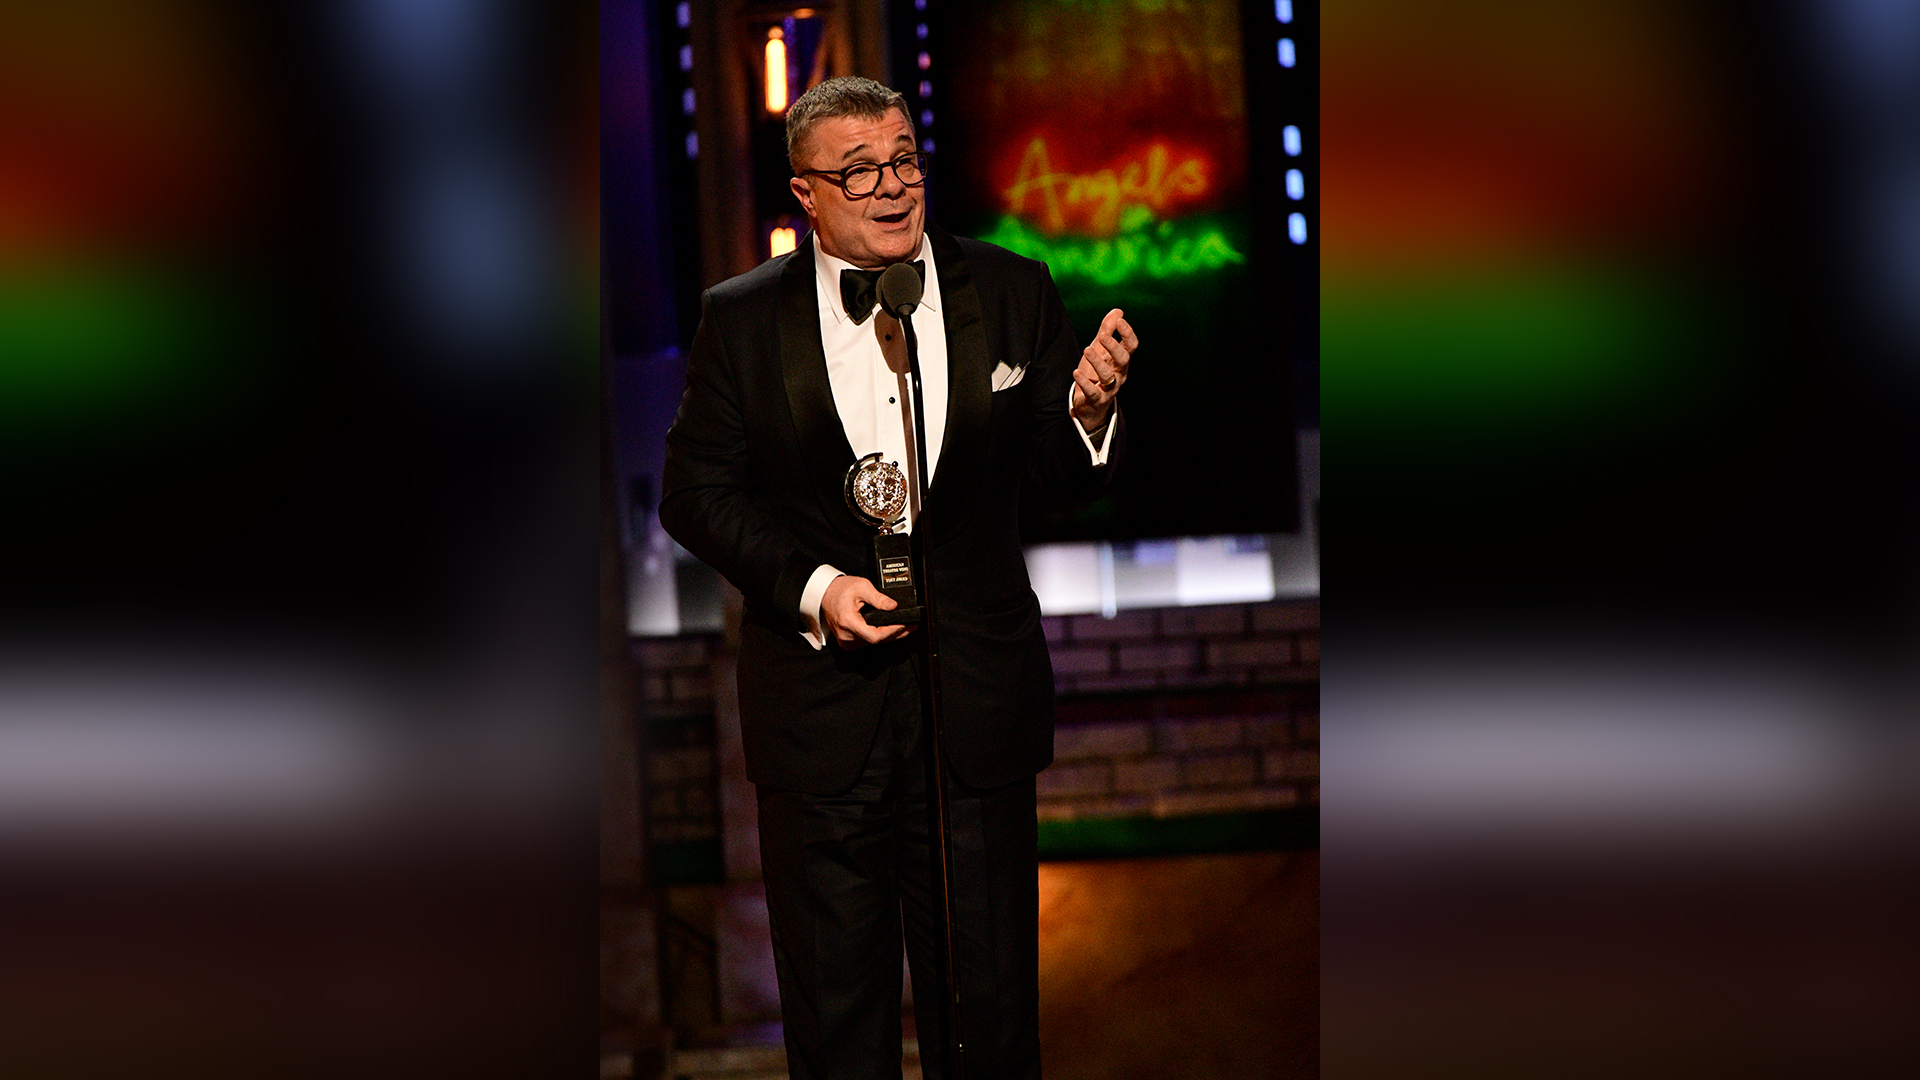 Nathan Lane wins Best Featured Actor in a Play at the 2018 Tony Awards.